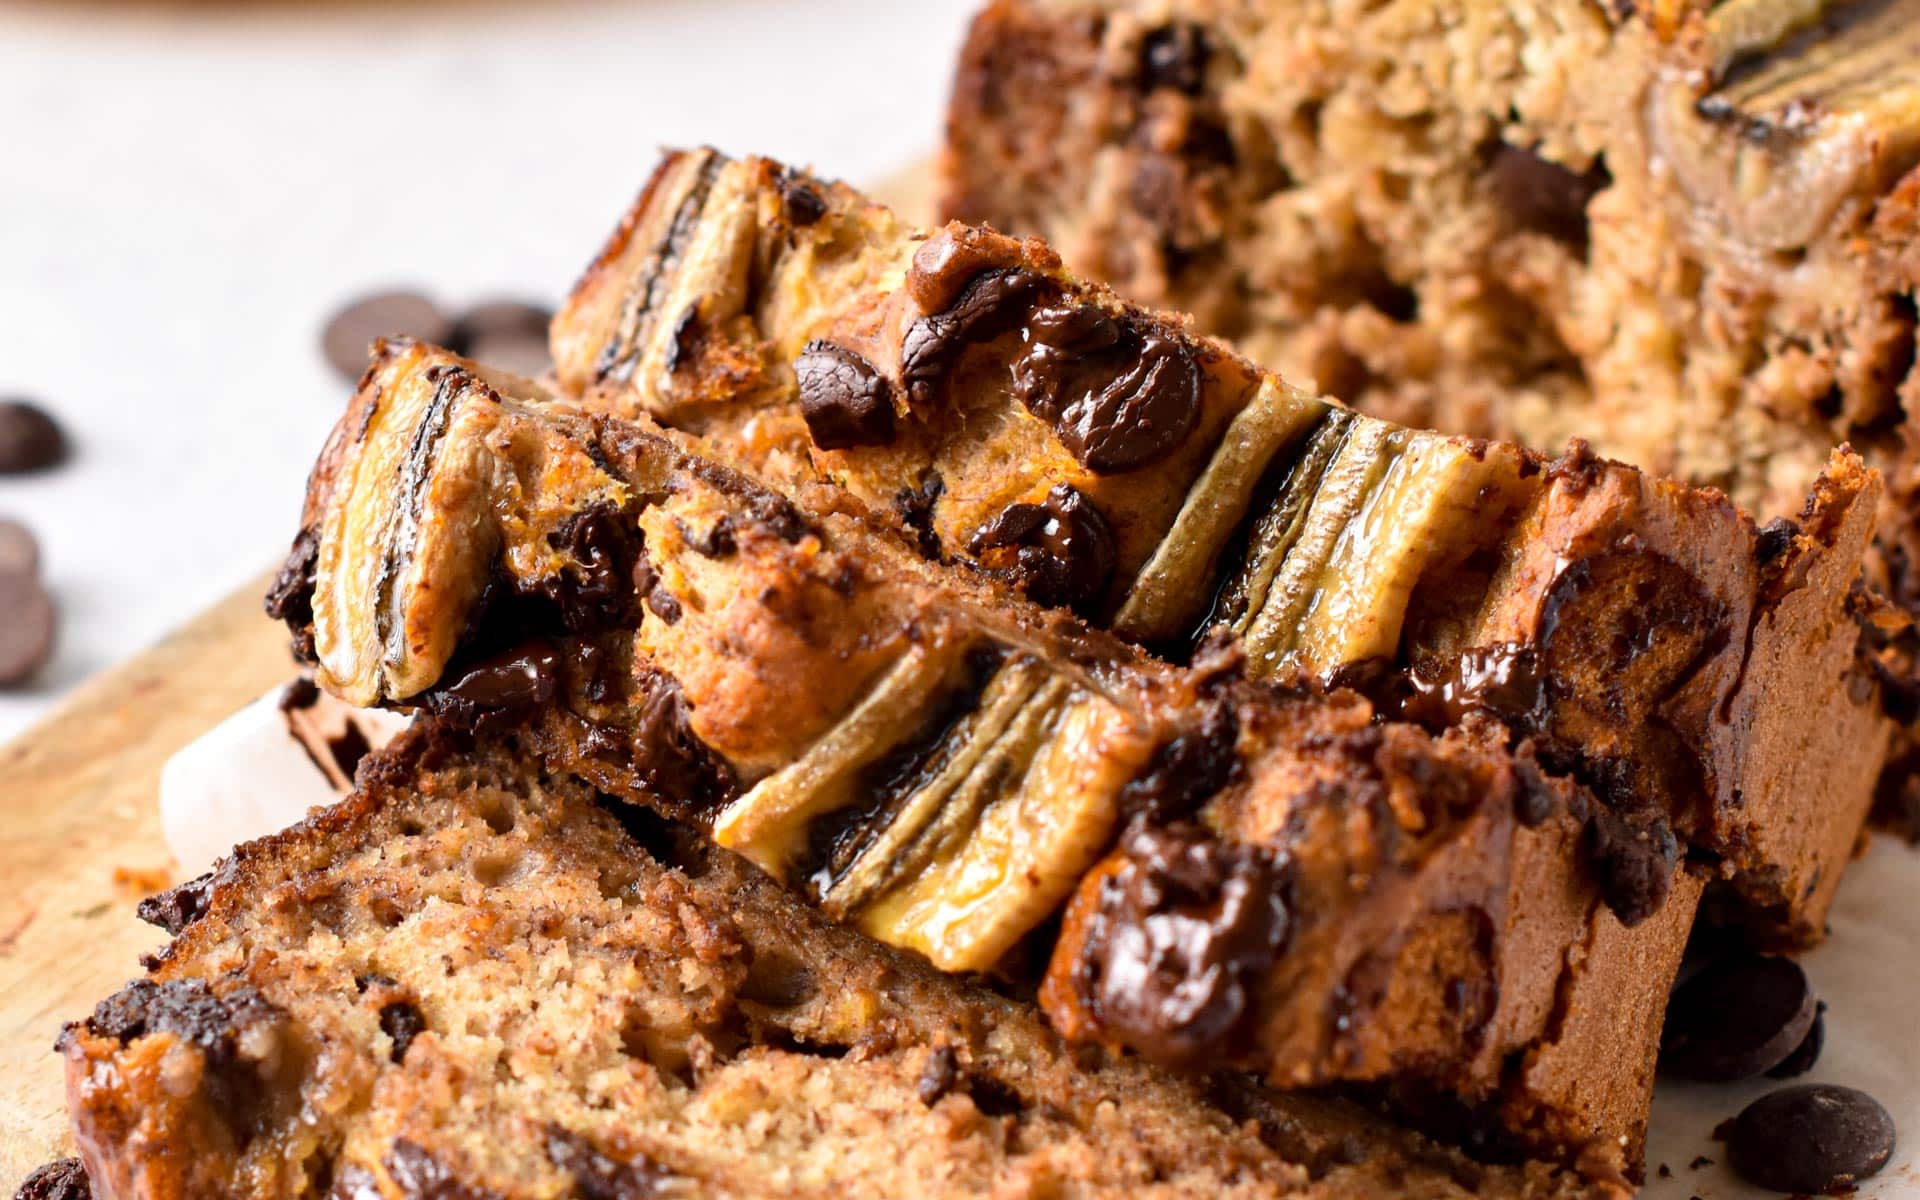 This Vegan Chocolate Chip Banana Bread is an easy, soft and moist banana bread filled with crunchy chocolate chips.